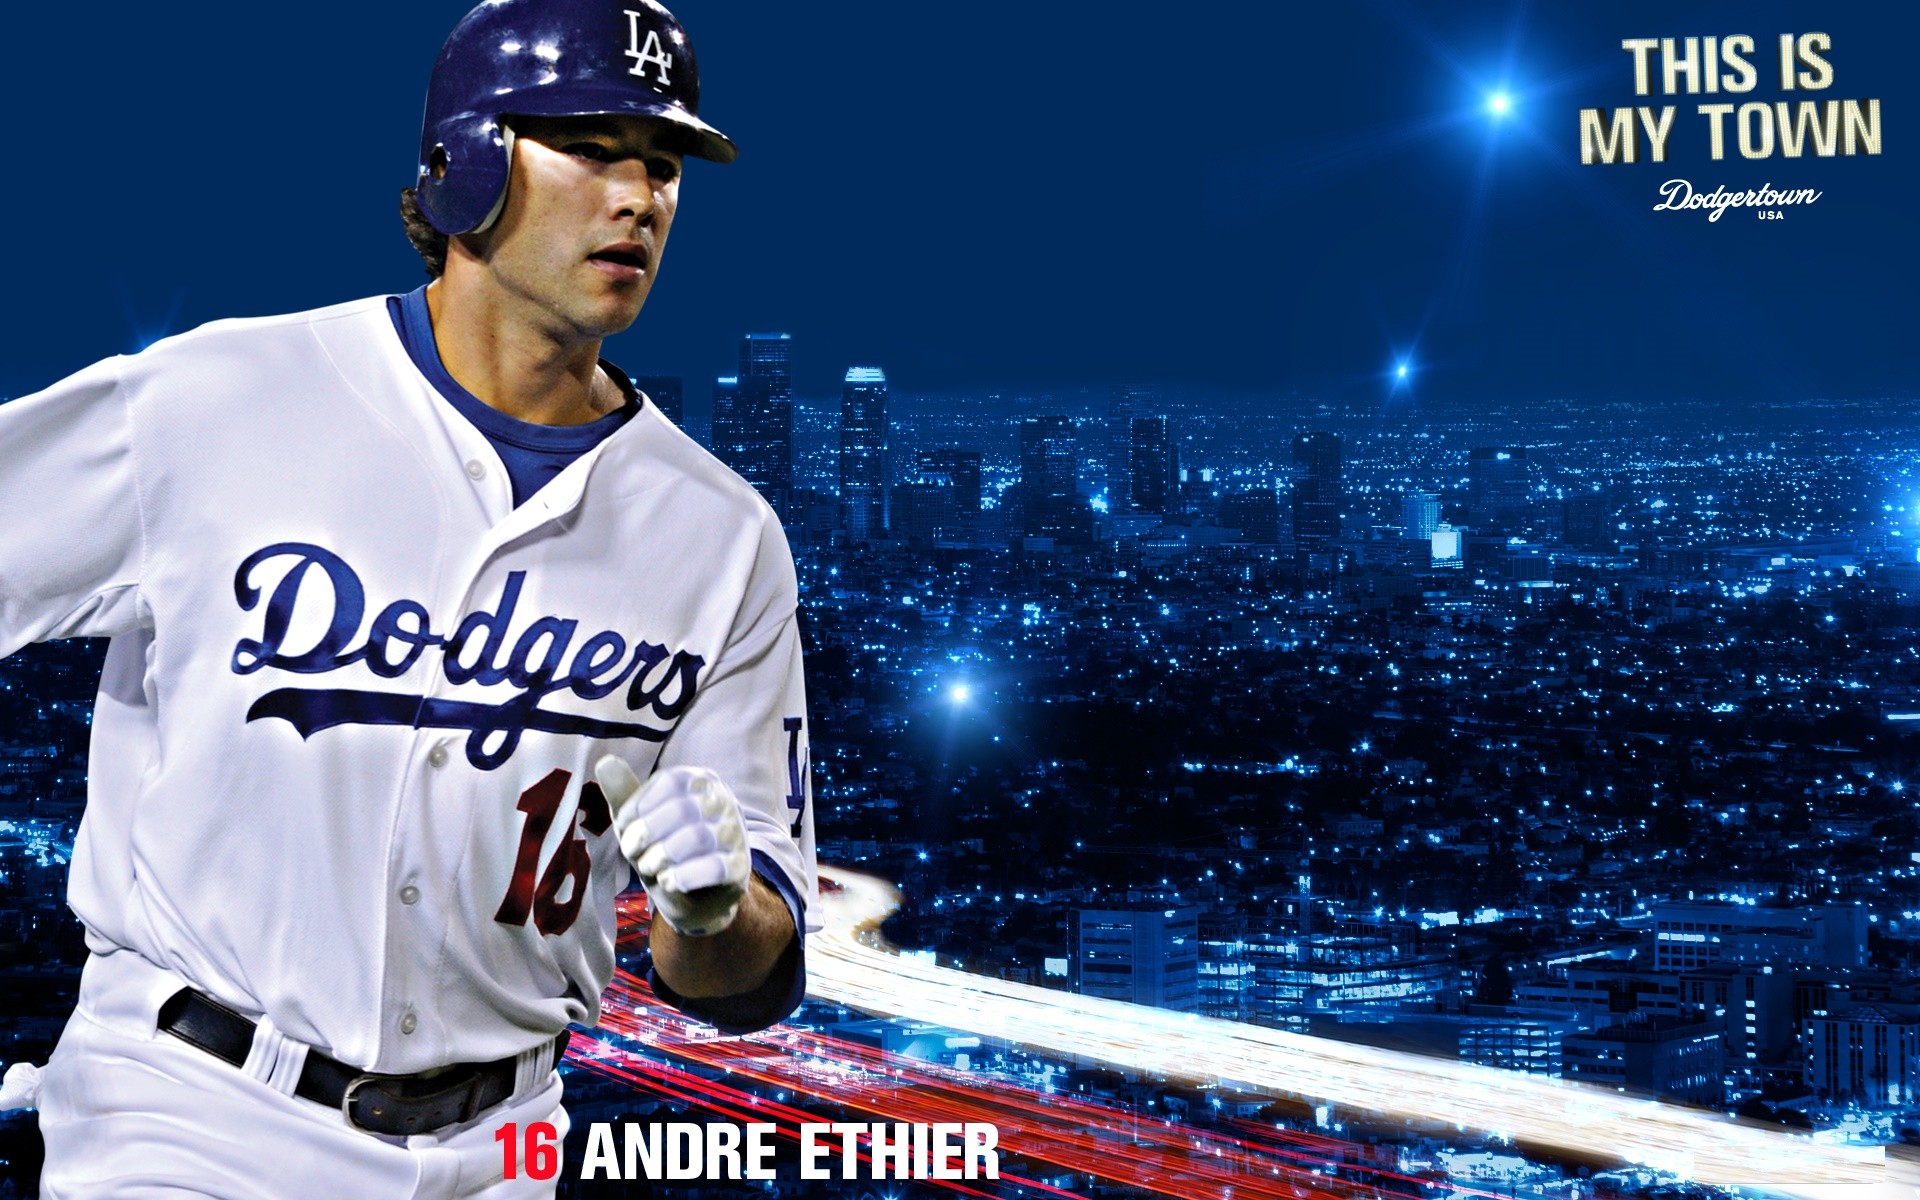 Dodgers Wallpaper For Home Page.